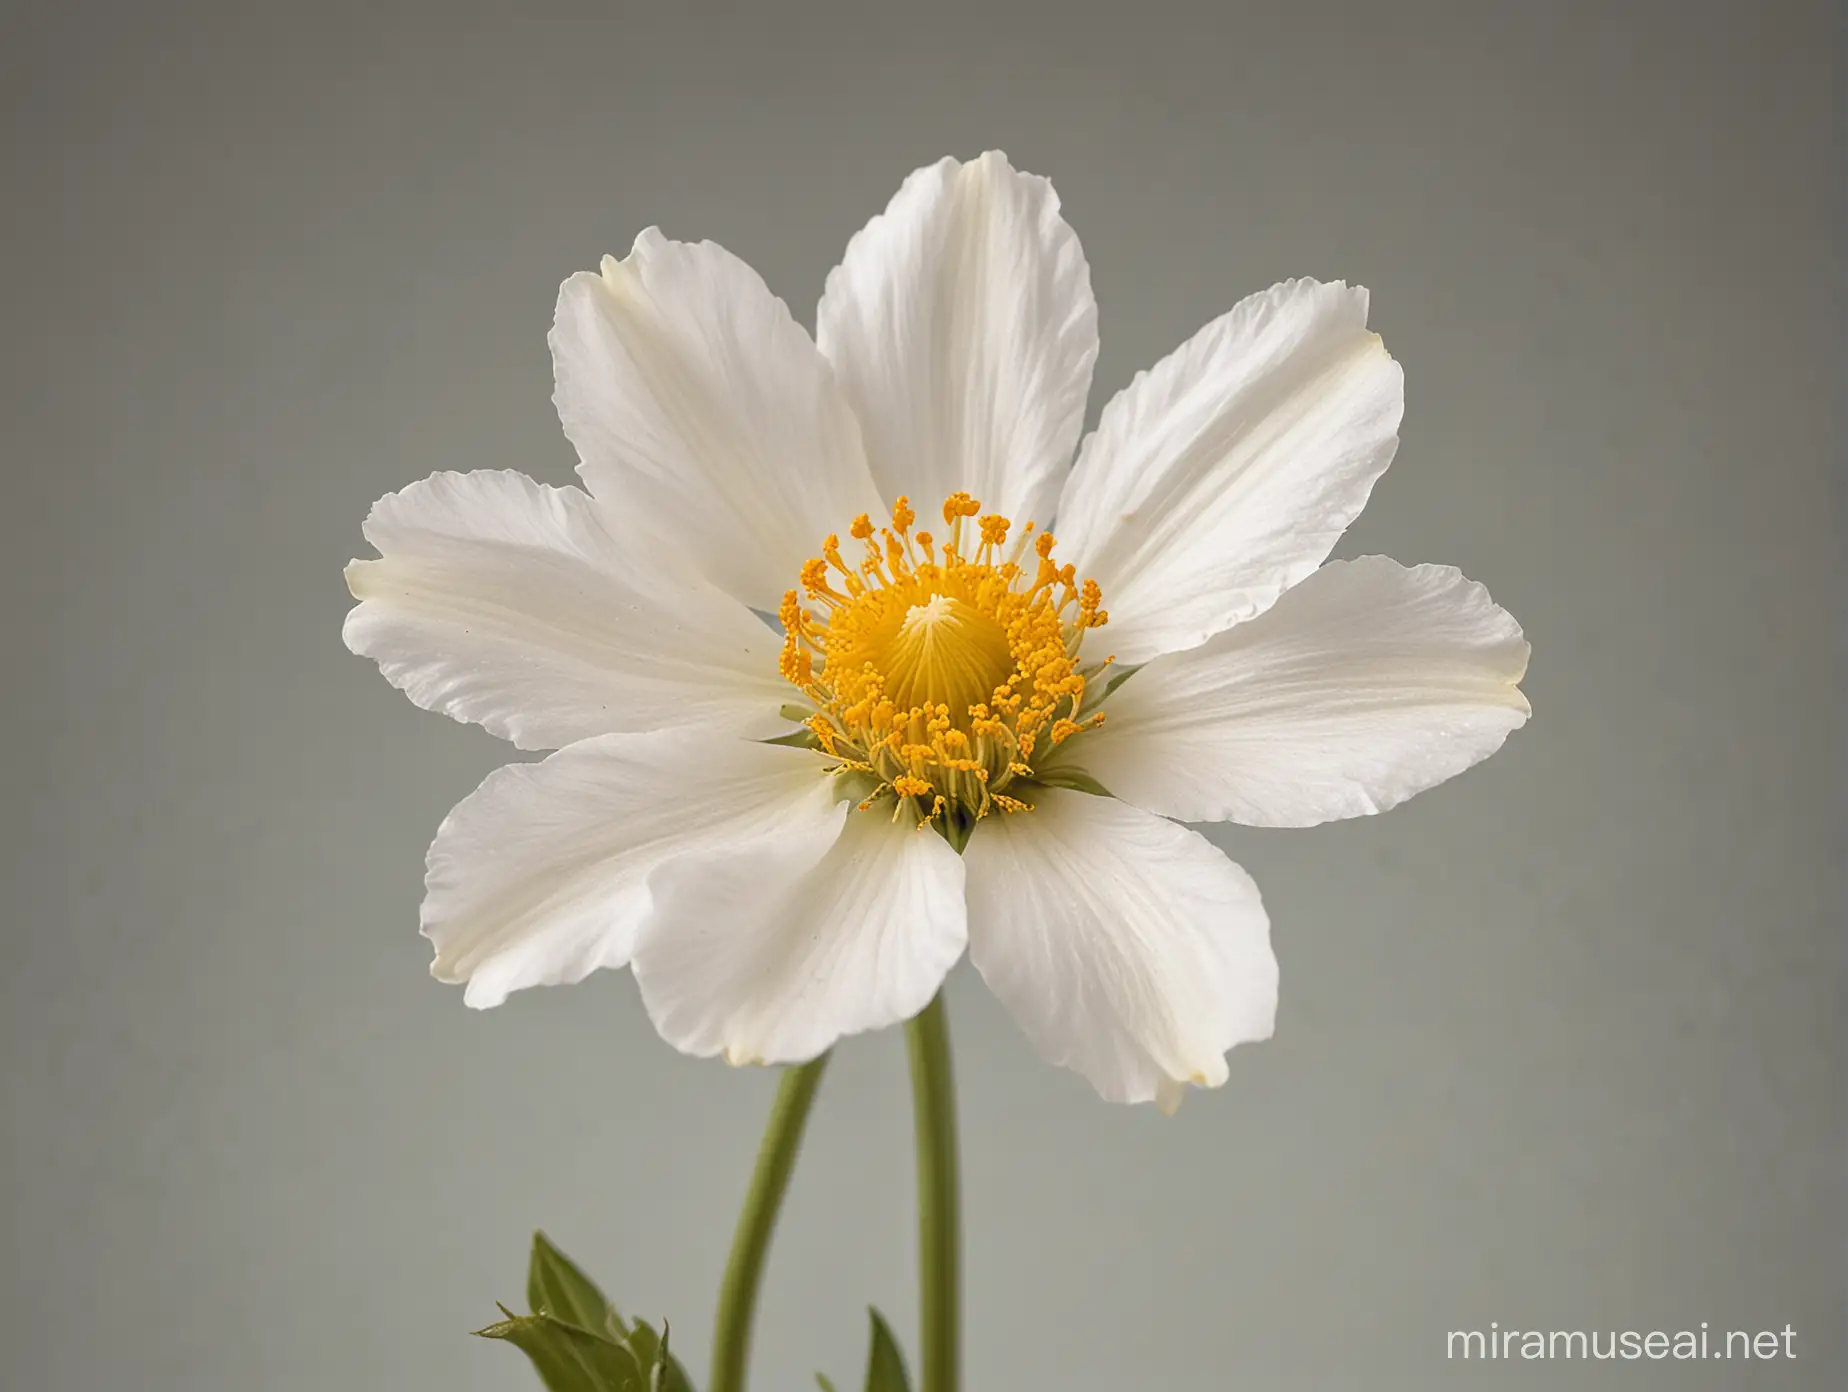 Elegant White Flower with Yellow Center on Isolated Background